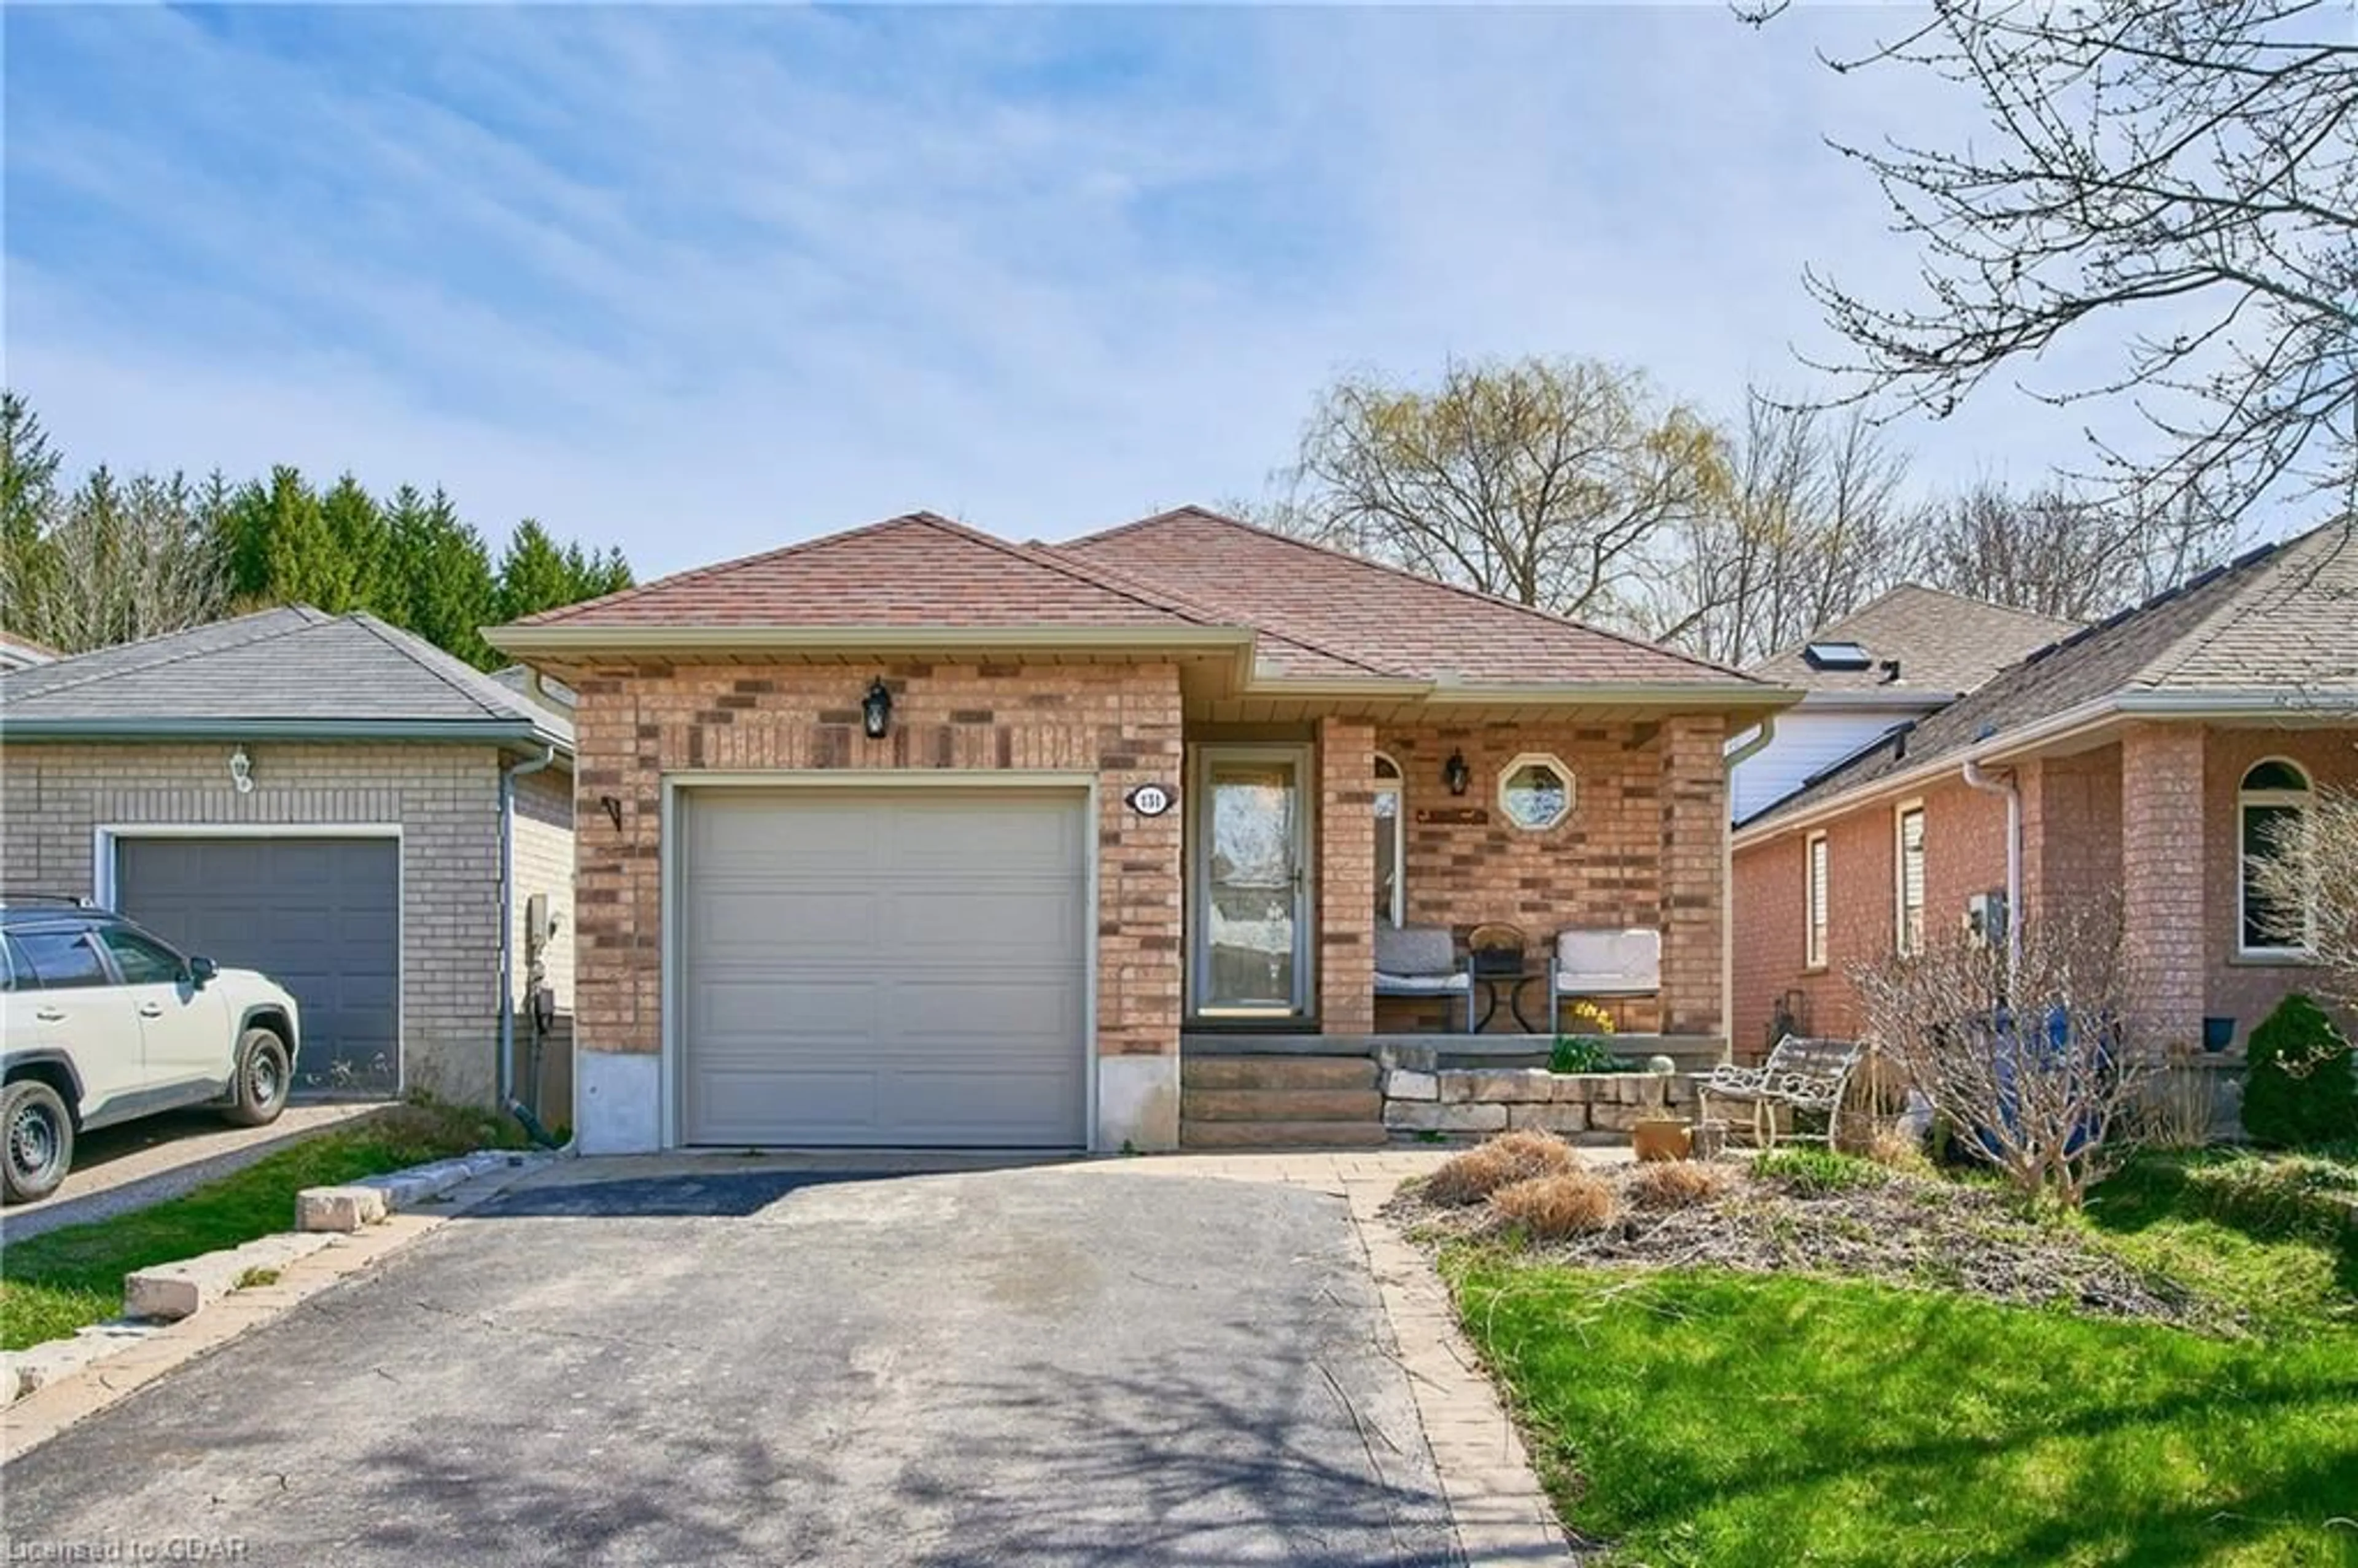 Home with brick exterior material for 131 Ptarmigan Dr, Guelph Ontario N1C 1E9